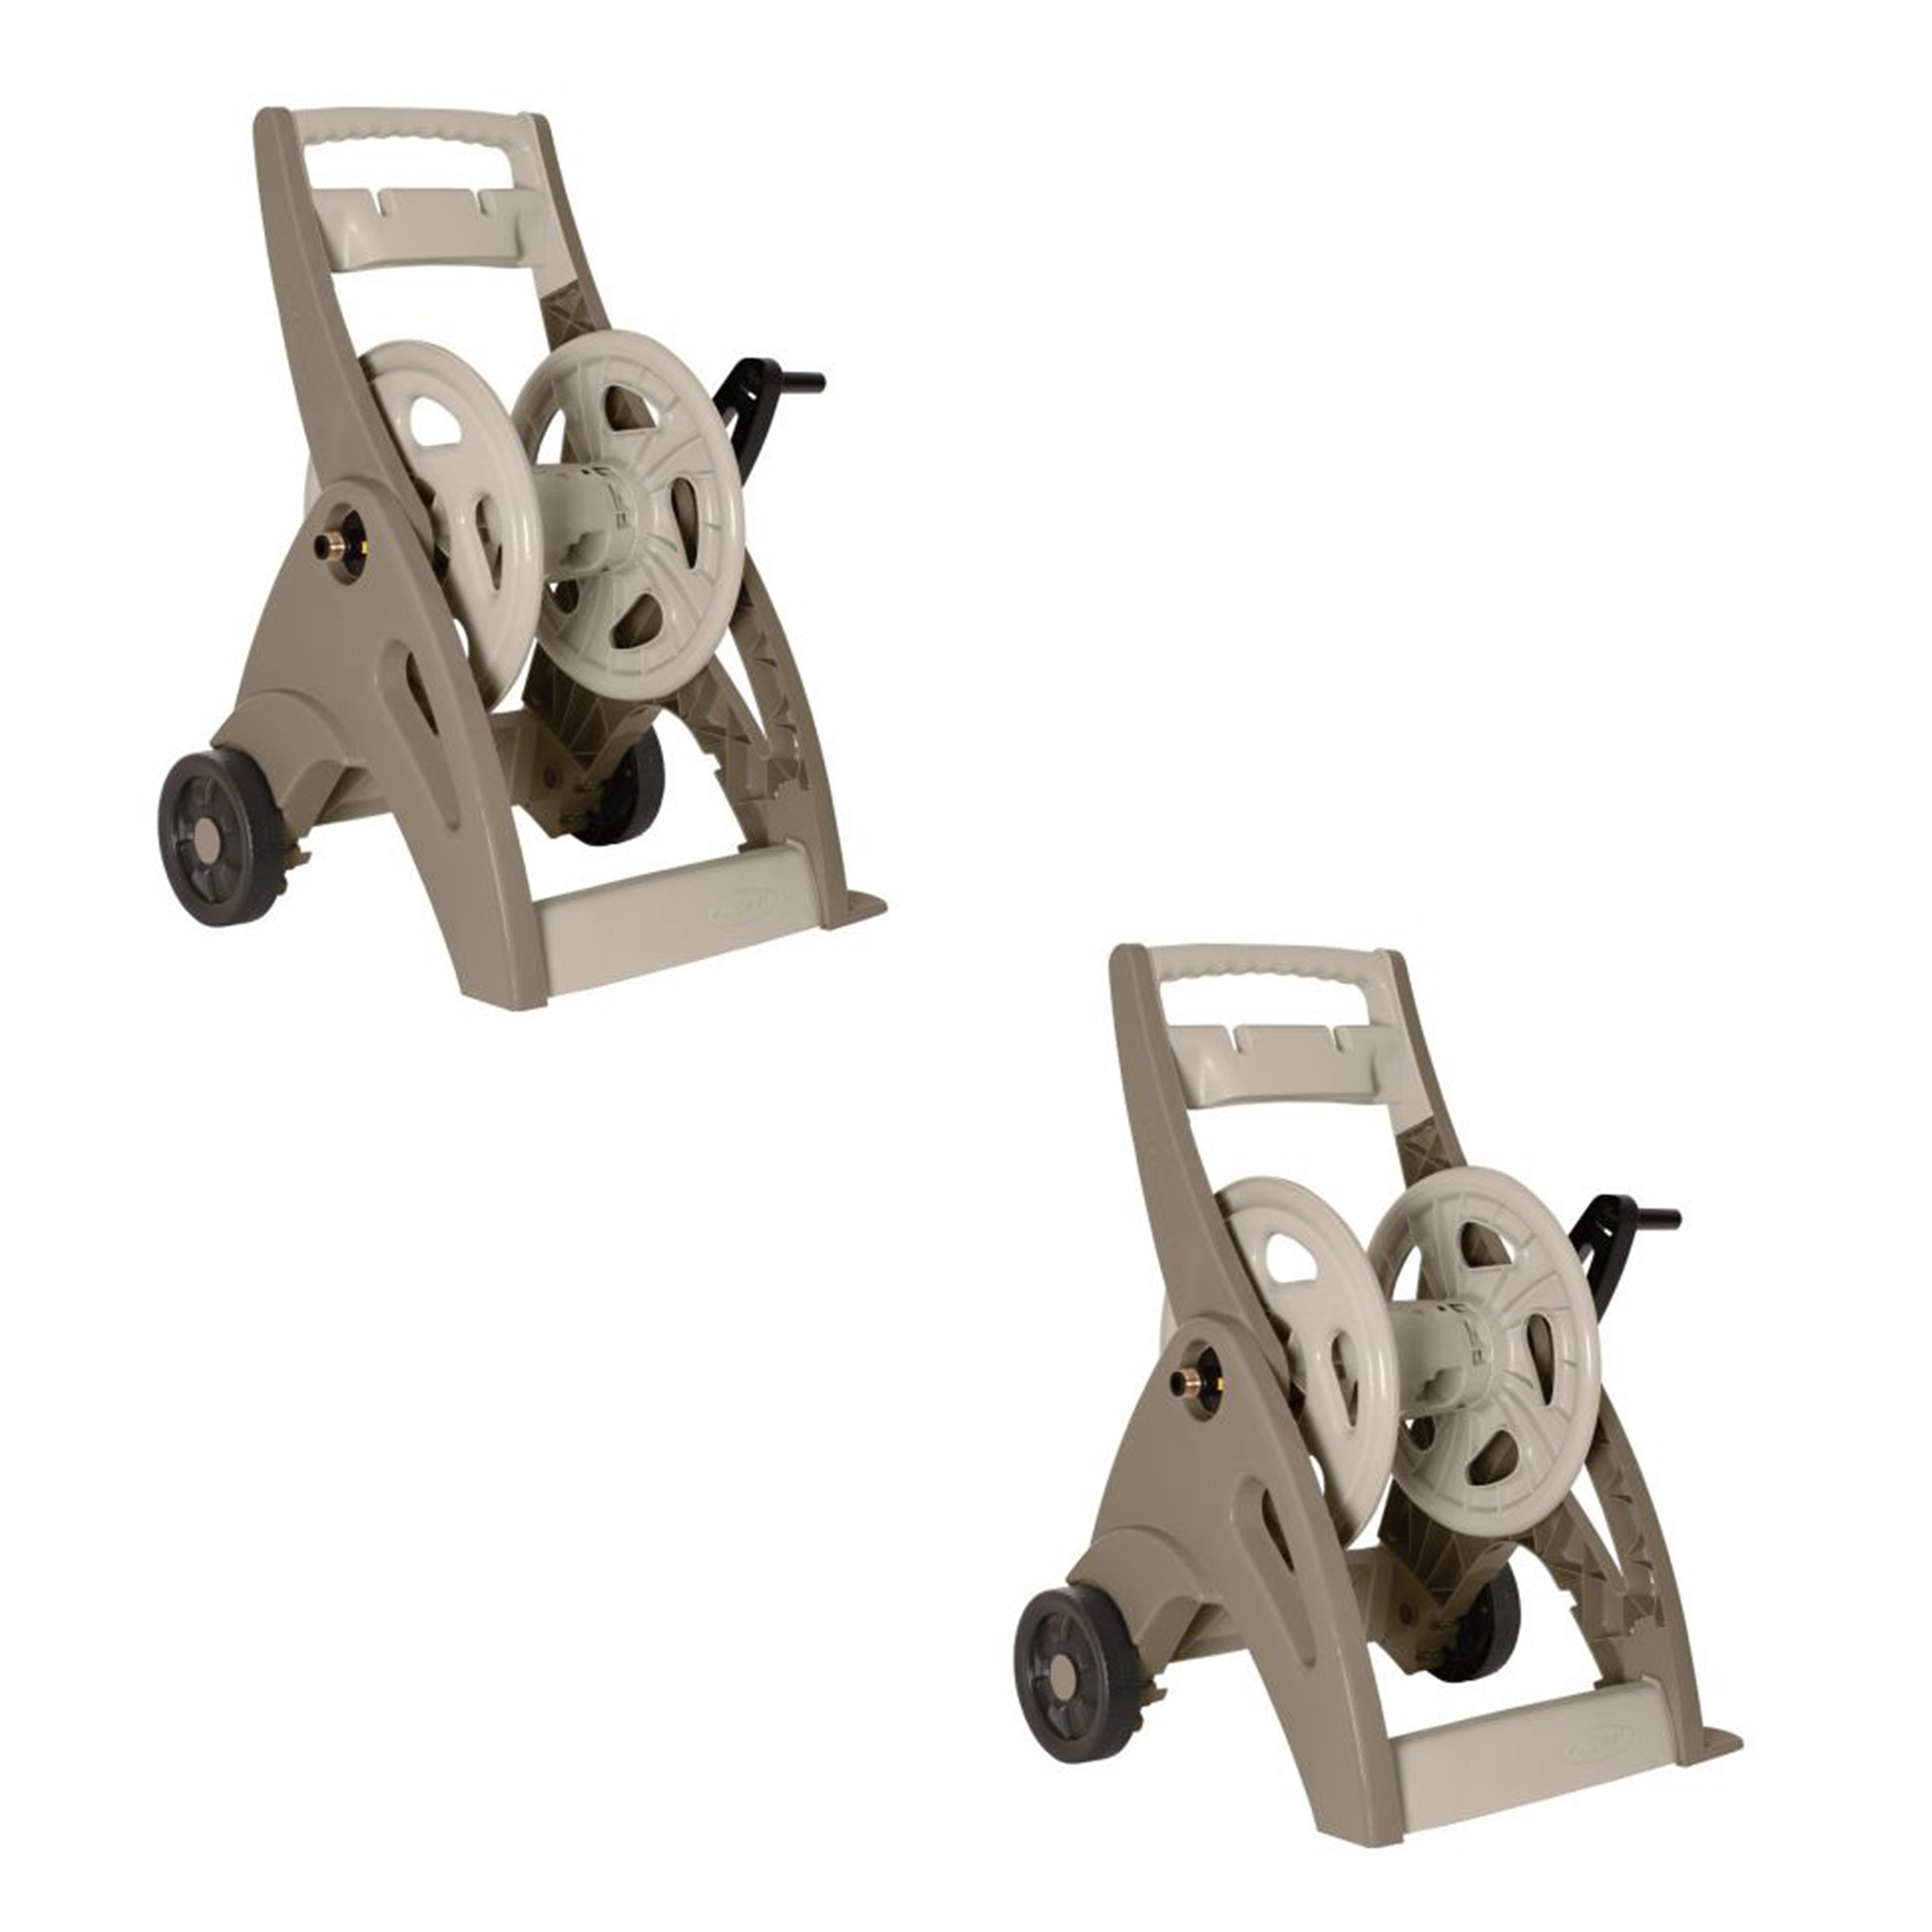 Suncast CPLJNF175BD Resin Garden Reel Hose Cart Caddy for 175-Foot 5/8" Vinyl Hose with Crank Handle and Wheels, Beige (2 Pack) - image 1 of 8